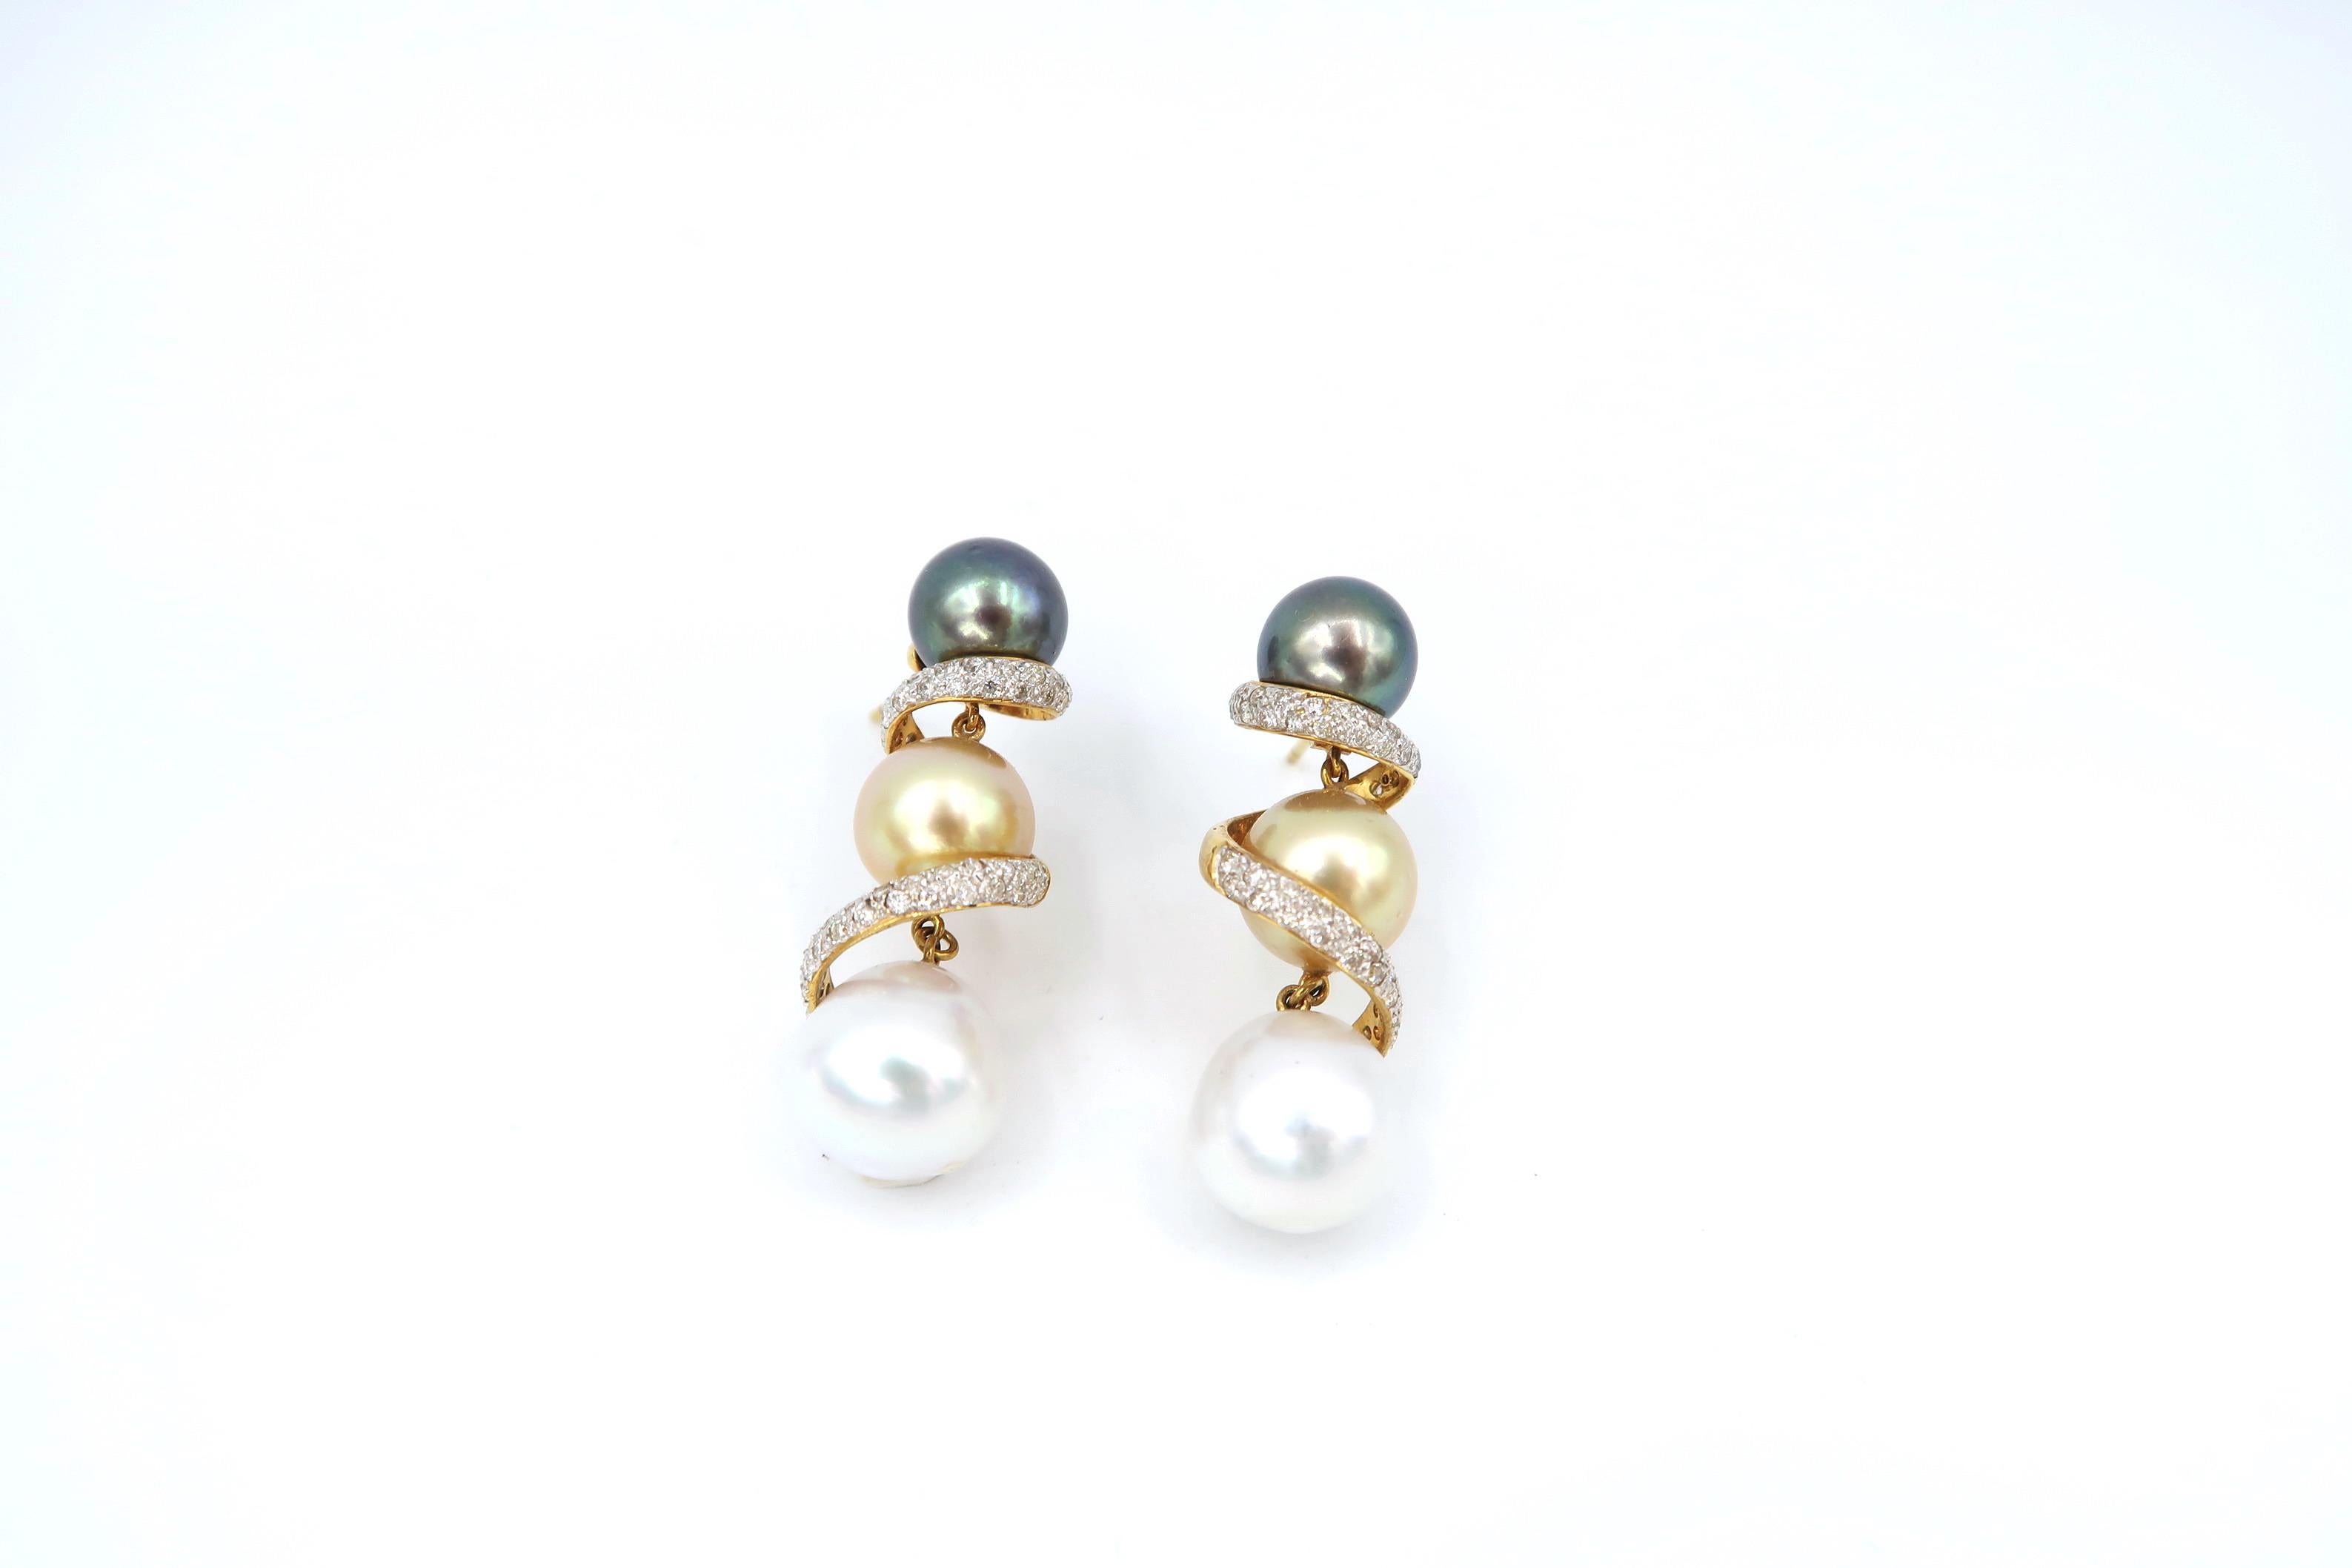 Bespoke Triple Pearl Drop Earrings with Diamond Pavé Spiral in 18K Gold

Height: approx. 1.5 inch

Gold: 18K Gold, approx. 7-7.5 g
White Diamond: approx. 1 ct in total
Pearls: 6 pieces of saltwater pearls of your choice (Tahitian Pearls, Gold South